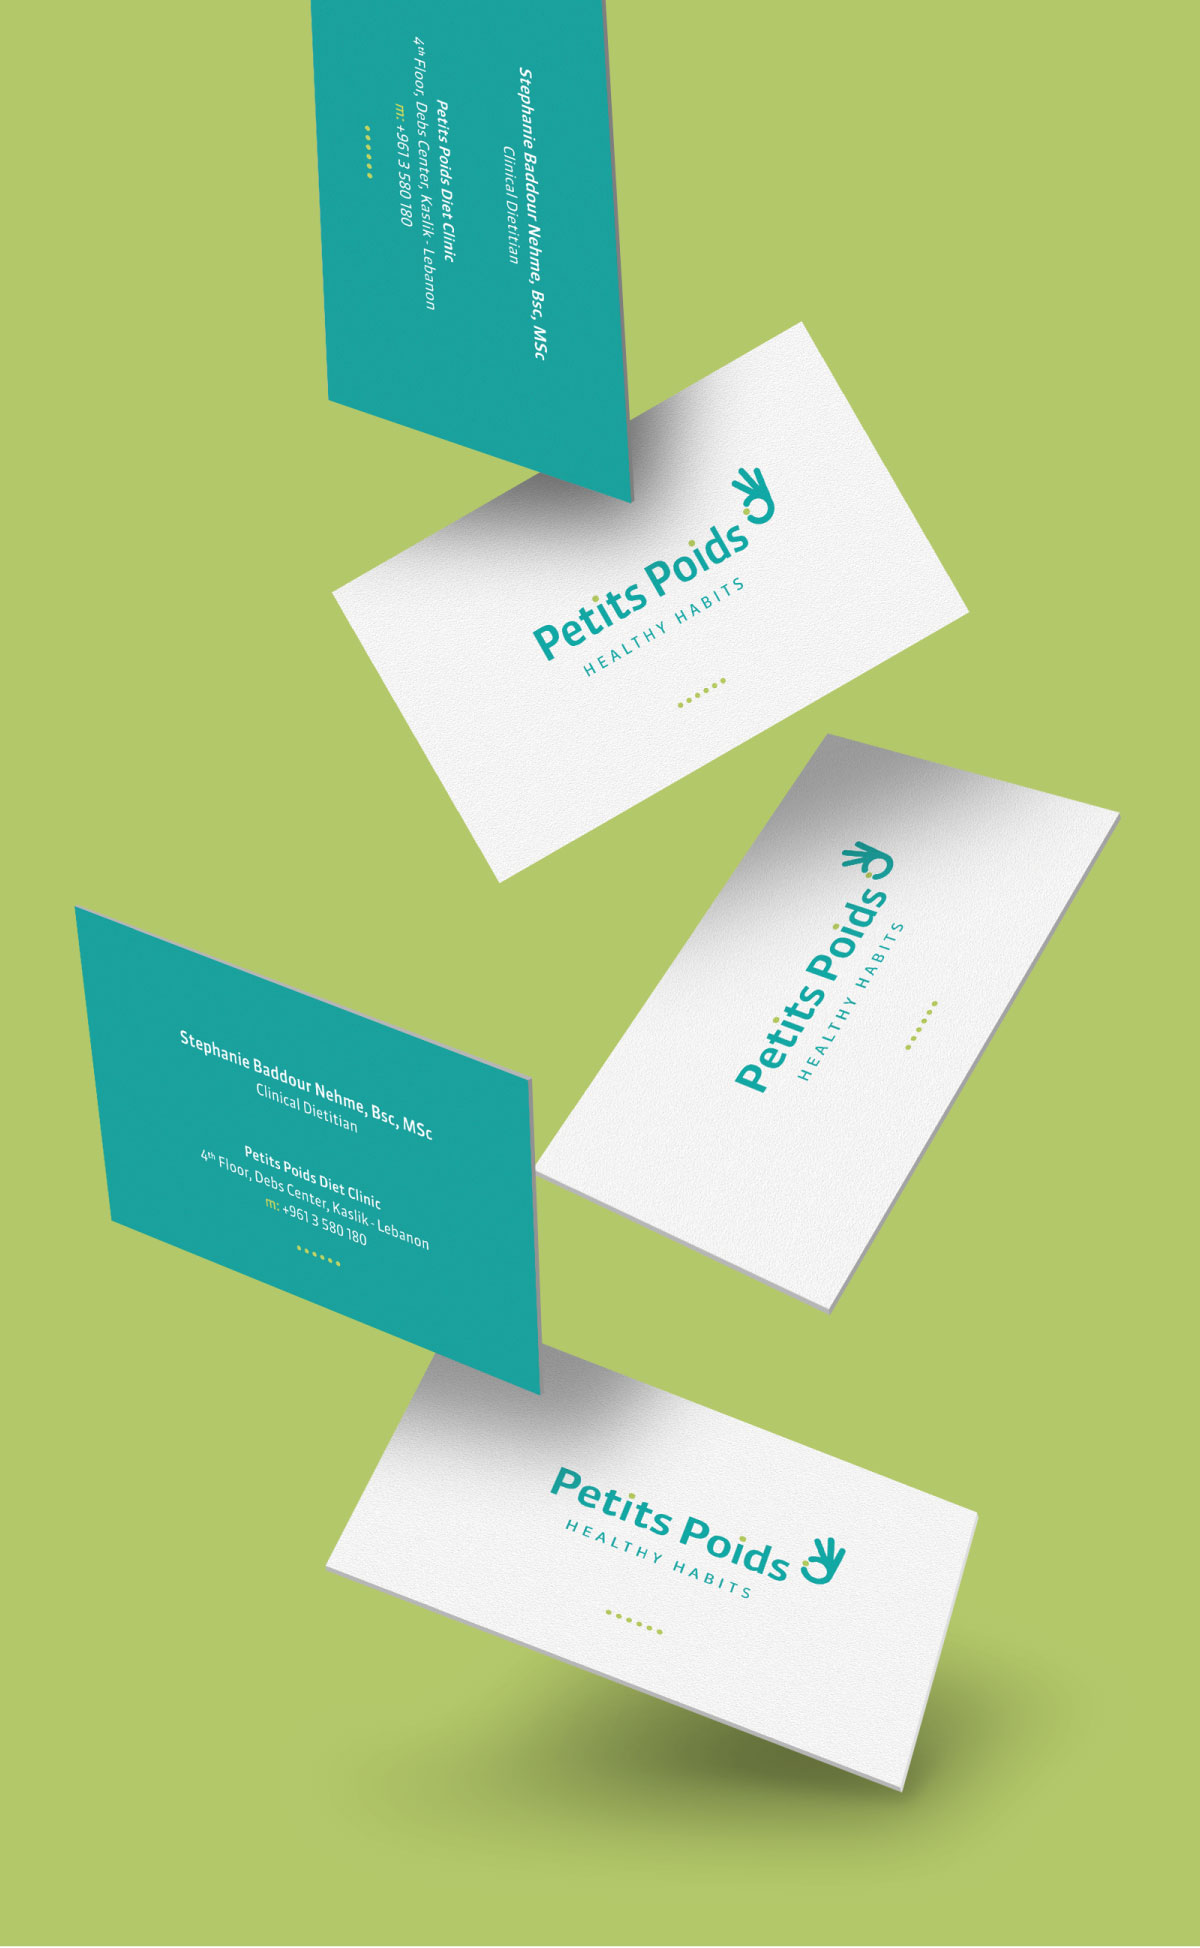 Petits Poids Diet Clinic - Creative Punch - Branding & Marketing Agency